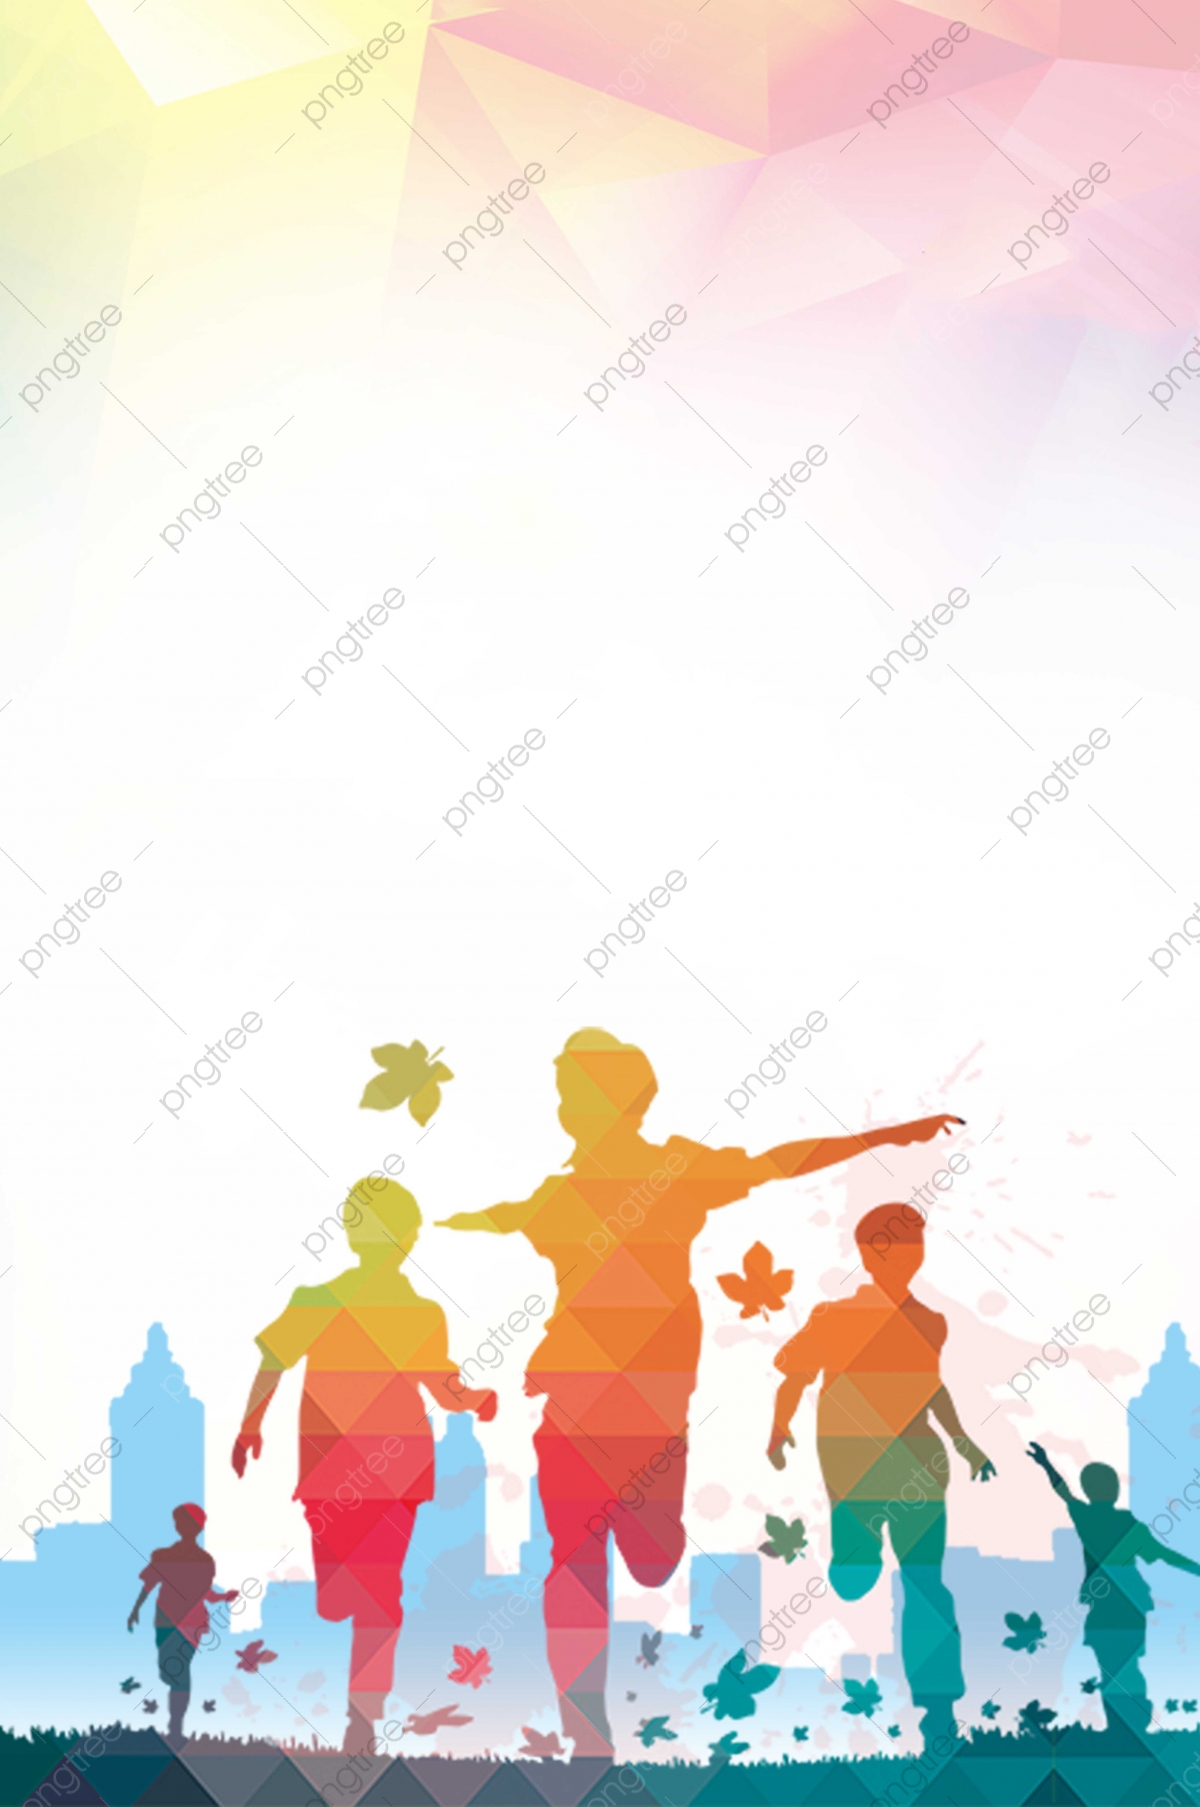 Youth Backgrounds